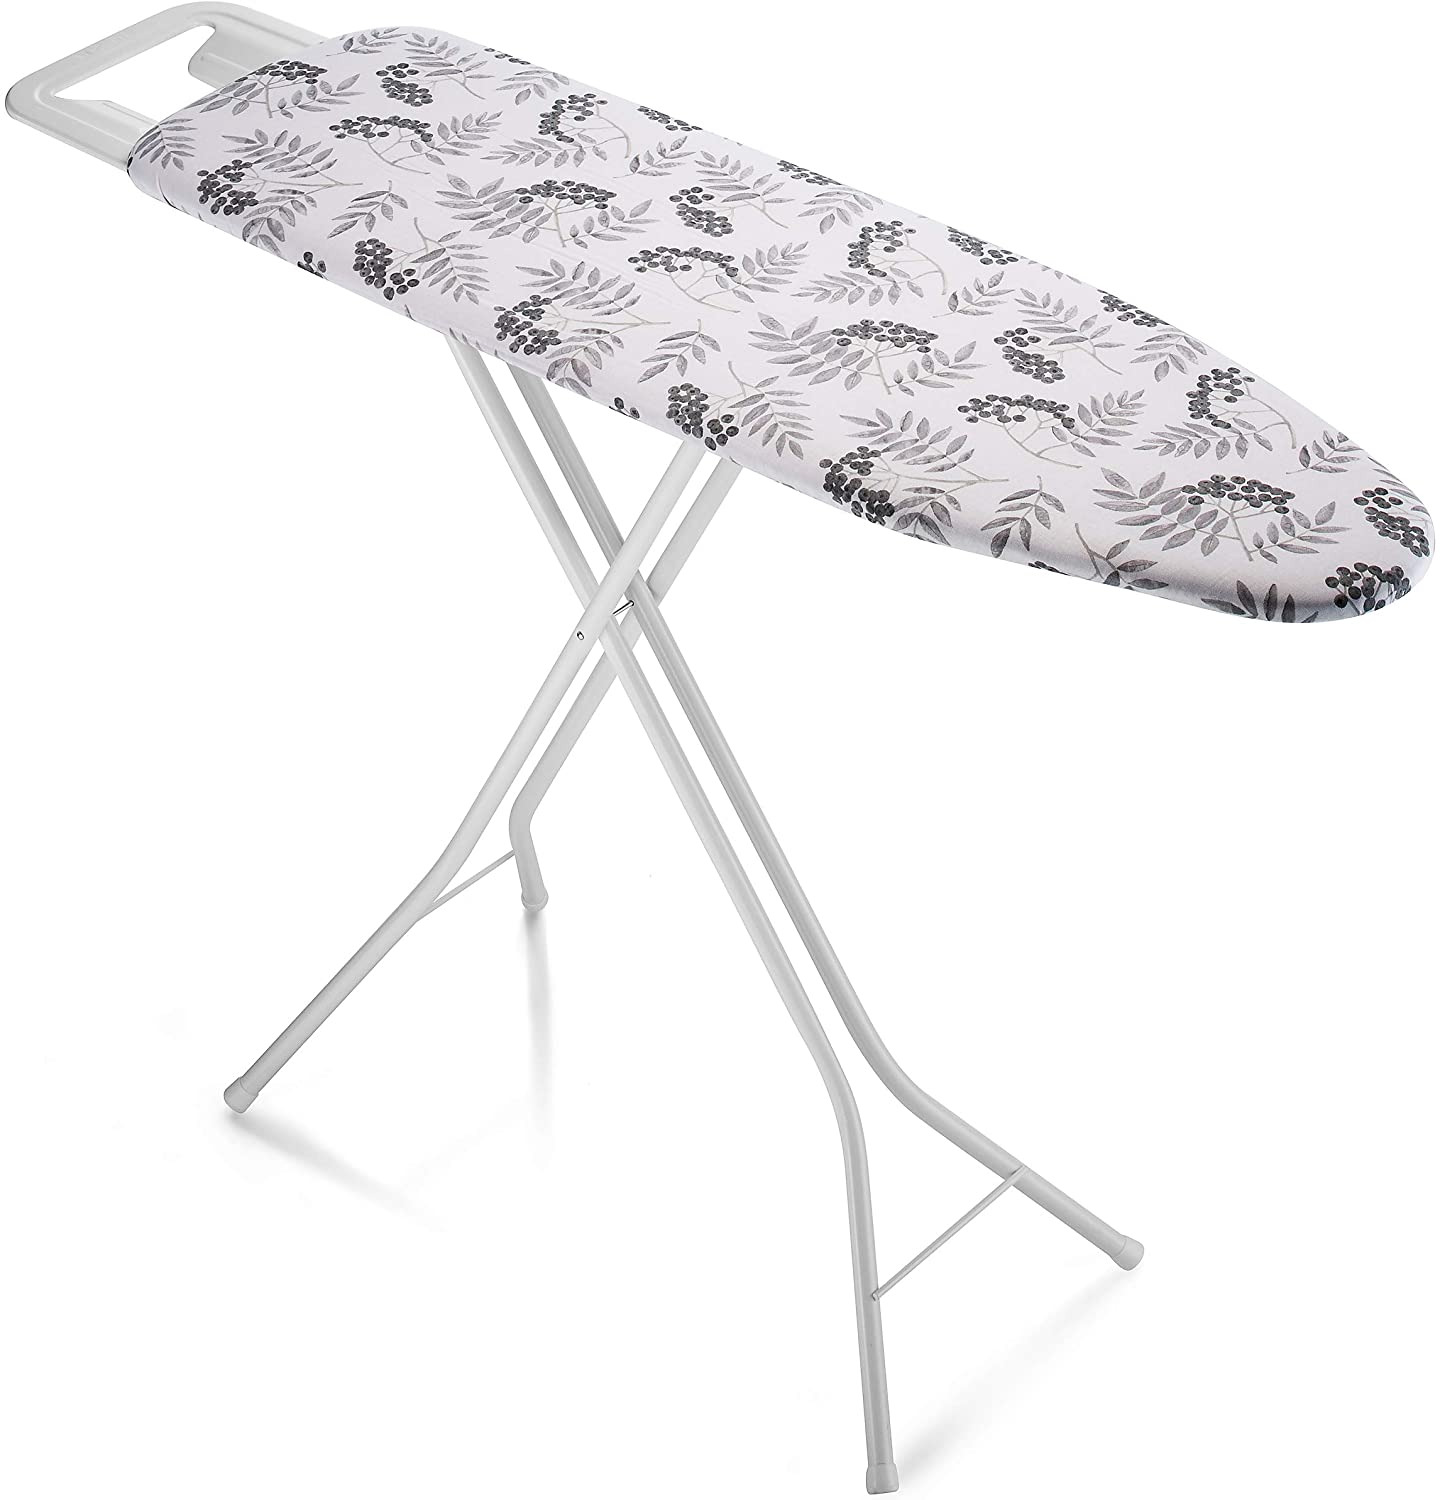 Bartnelli - 29"x36" Ironing Board With Adjustable Height, Iron Rest, 3 Layer Cover Pad, Grey & Floral